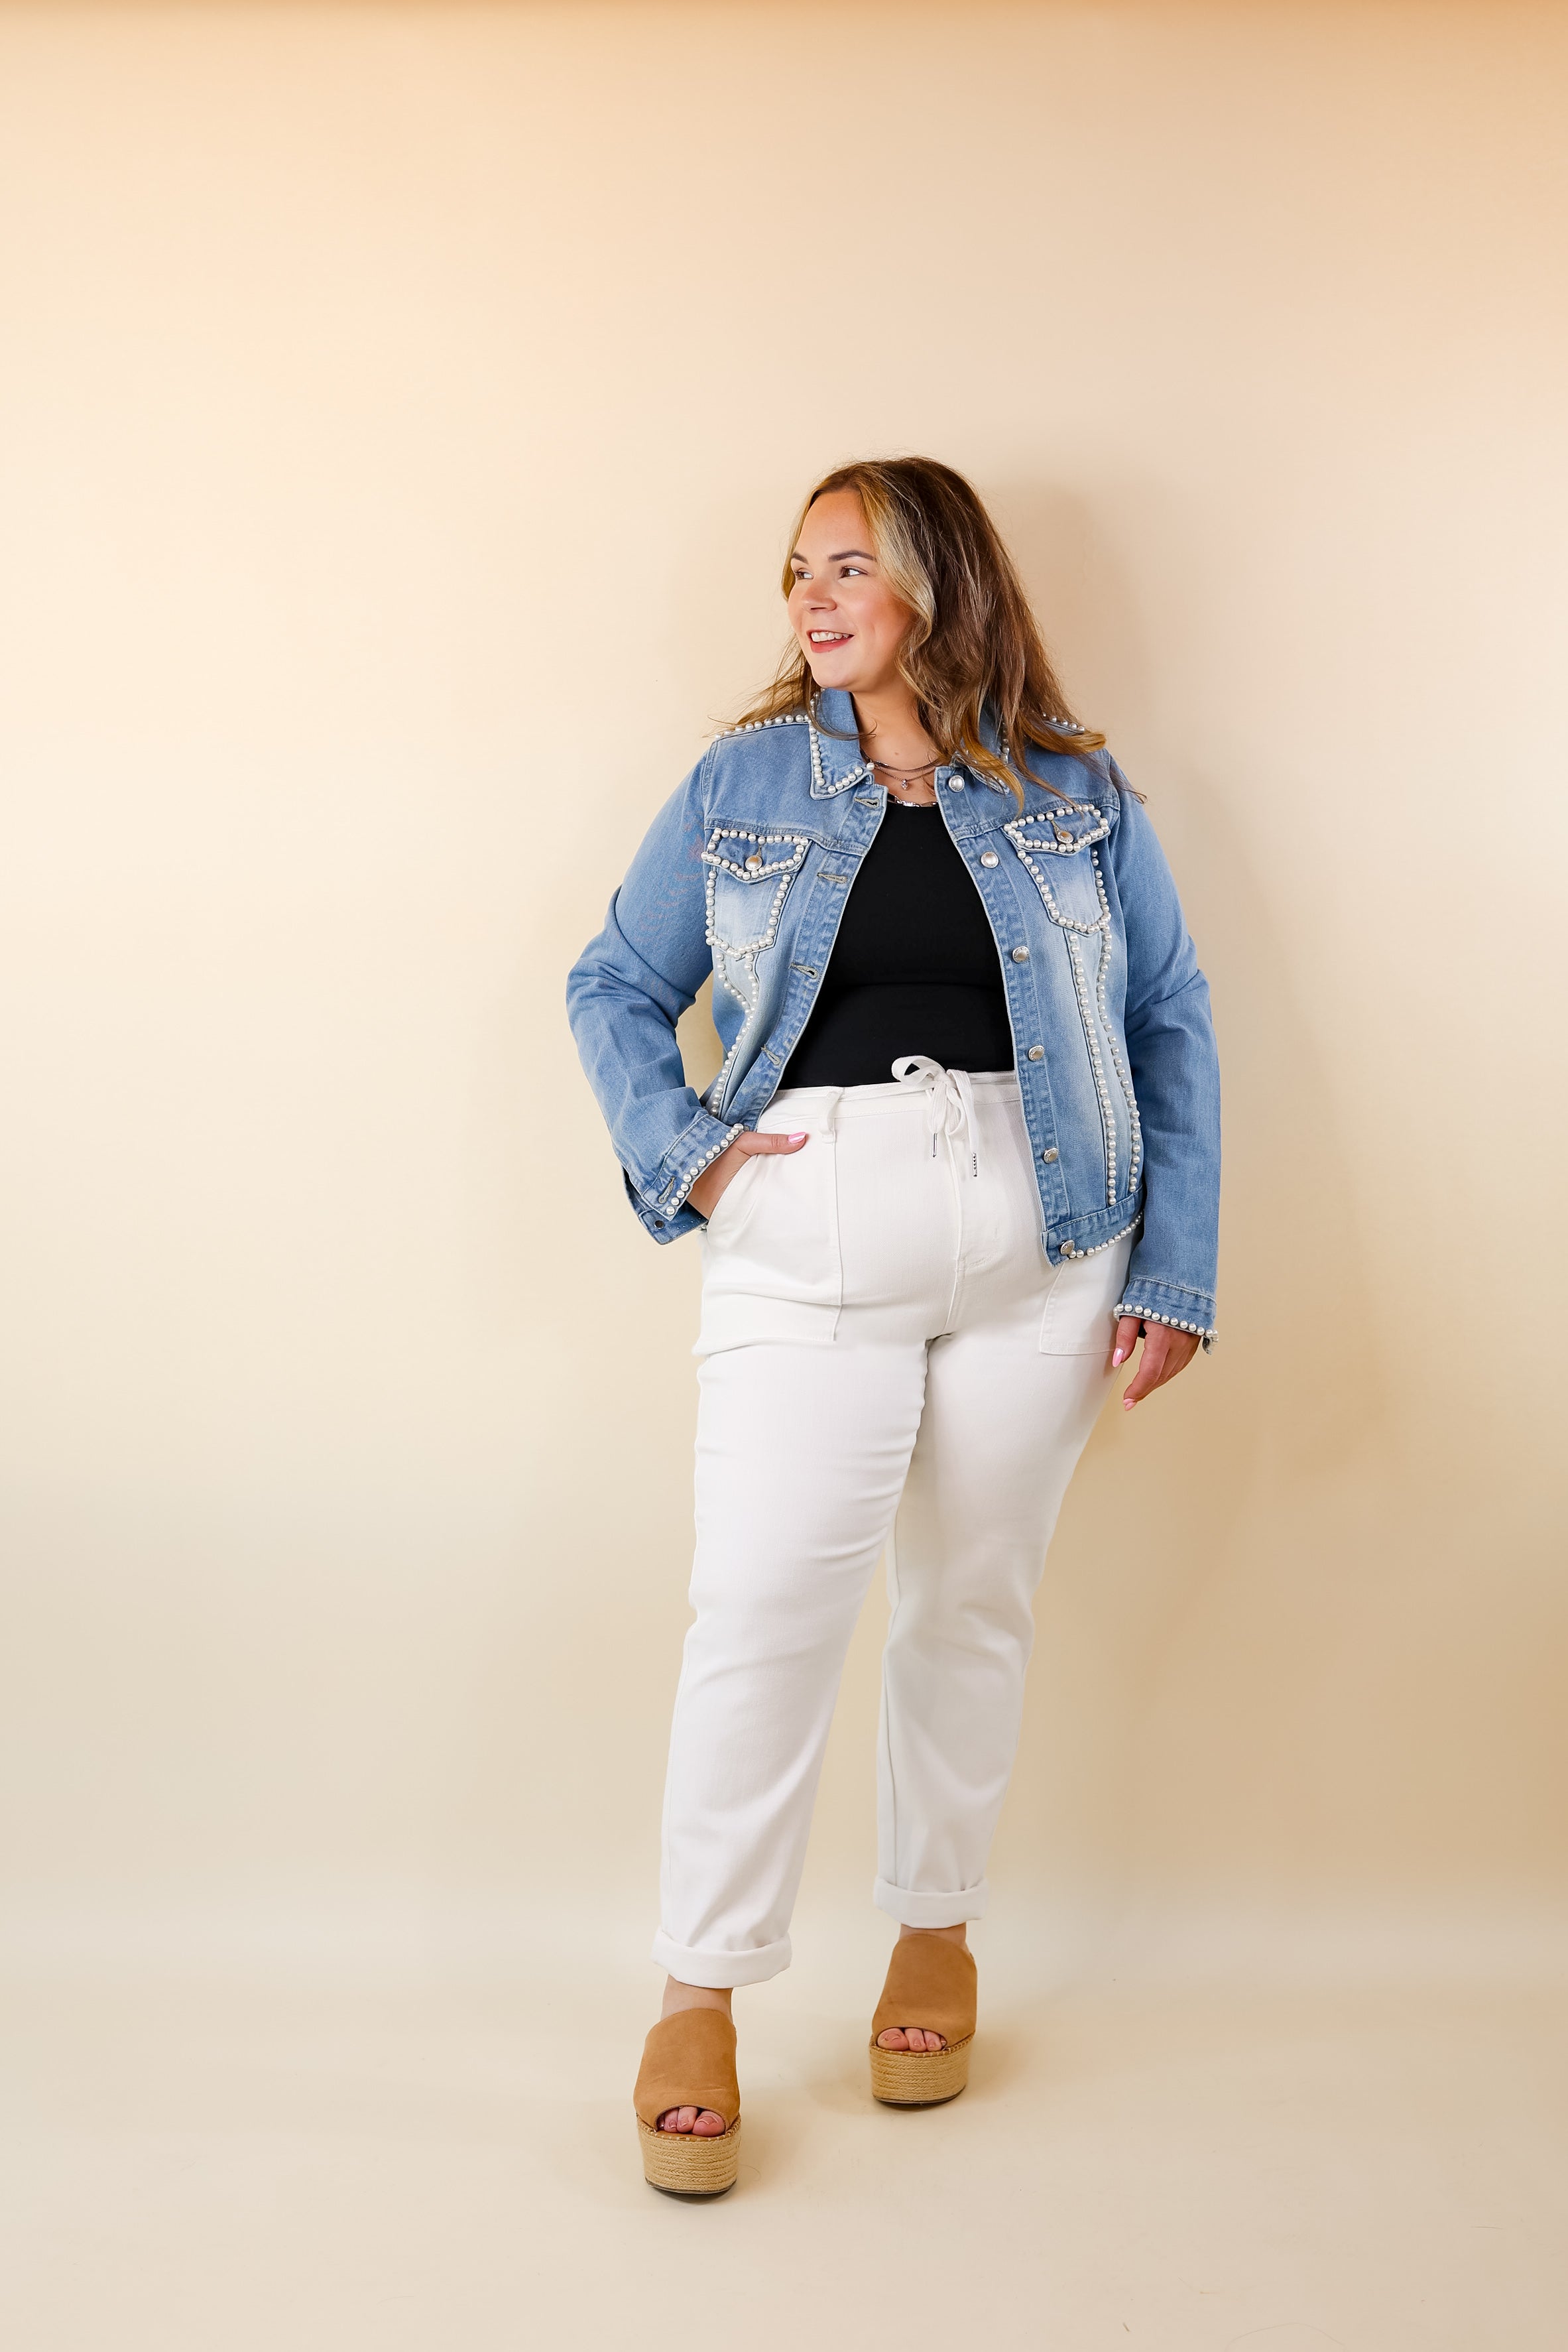 Pearls For the Girls Pearl Embellished Denim Jacket in Light Wash - Giddy Up Glamour Boutique